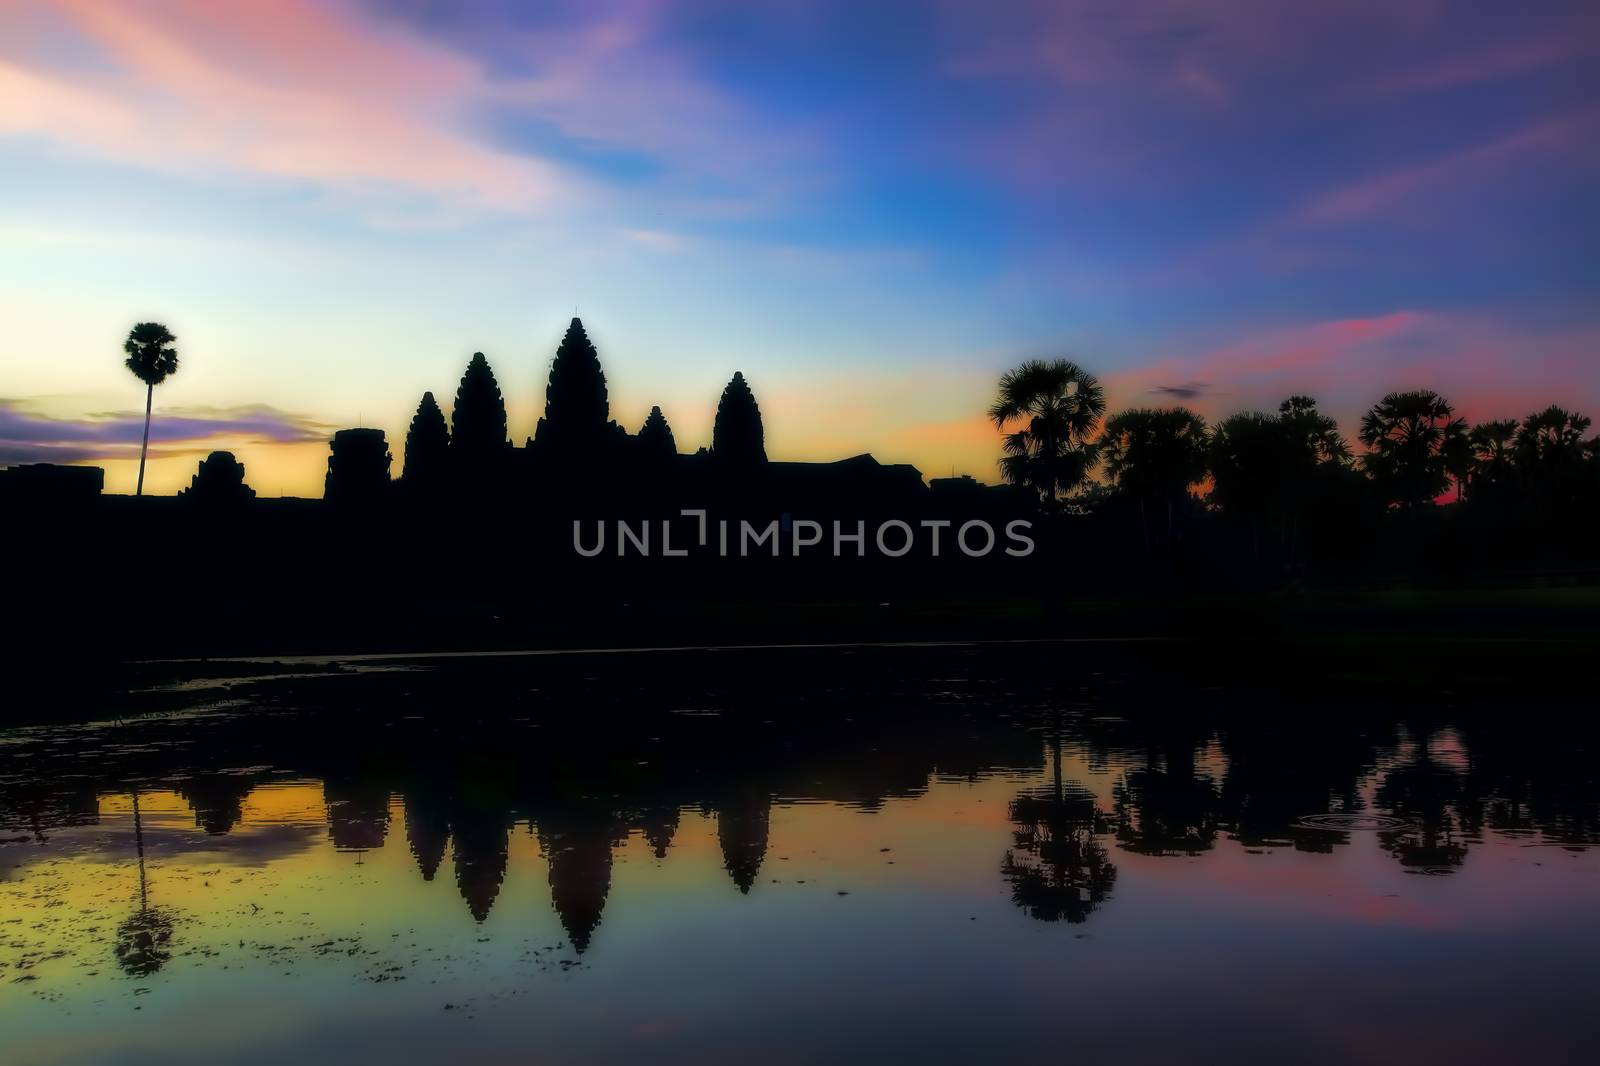 Sunrise over the Angkor Wat temple in Cambodia